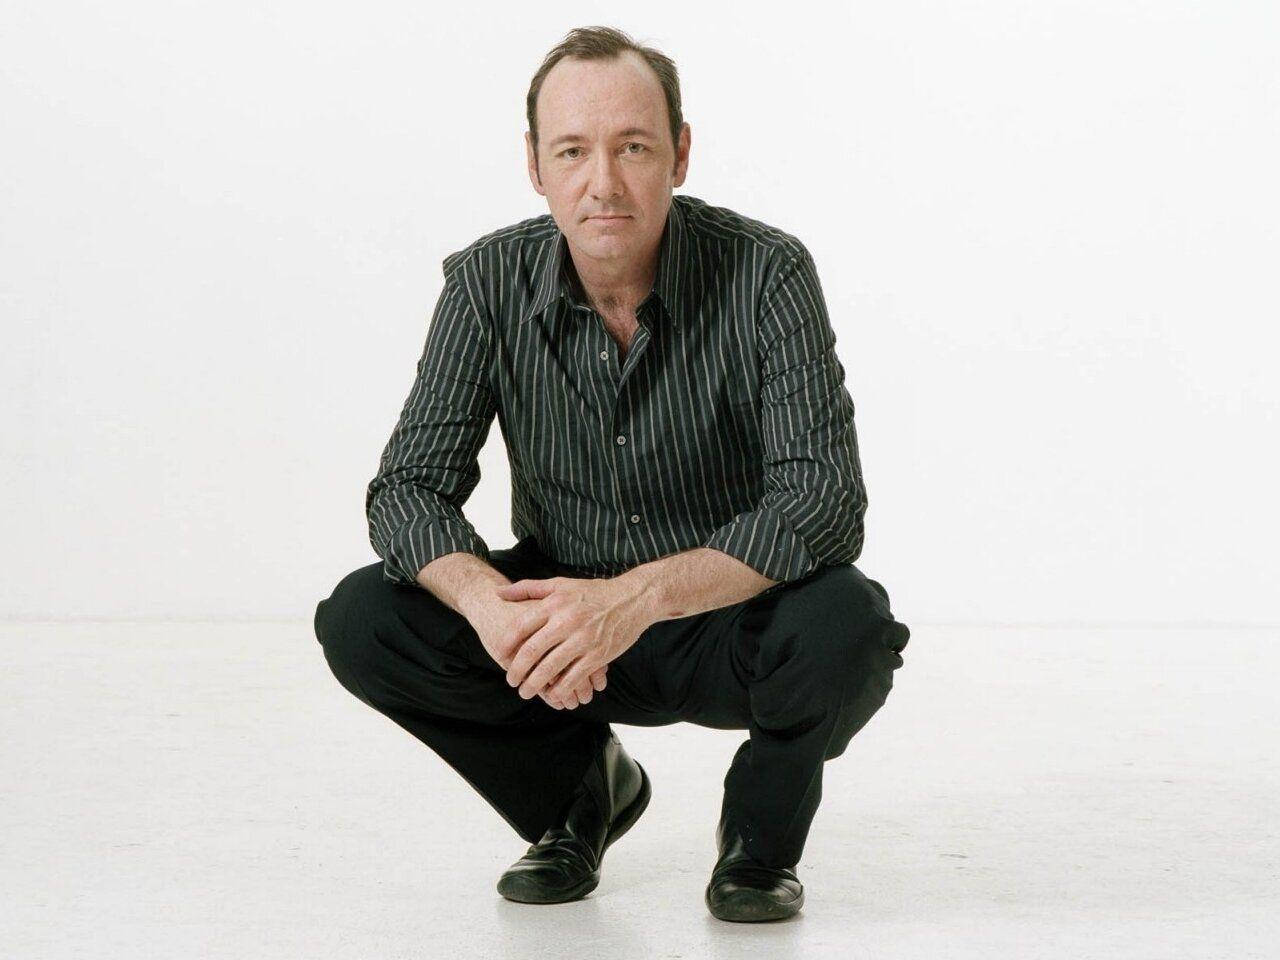 Kevin Spacey On A Squat Pose Wallpaper